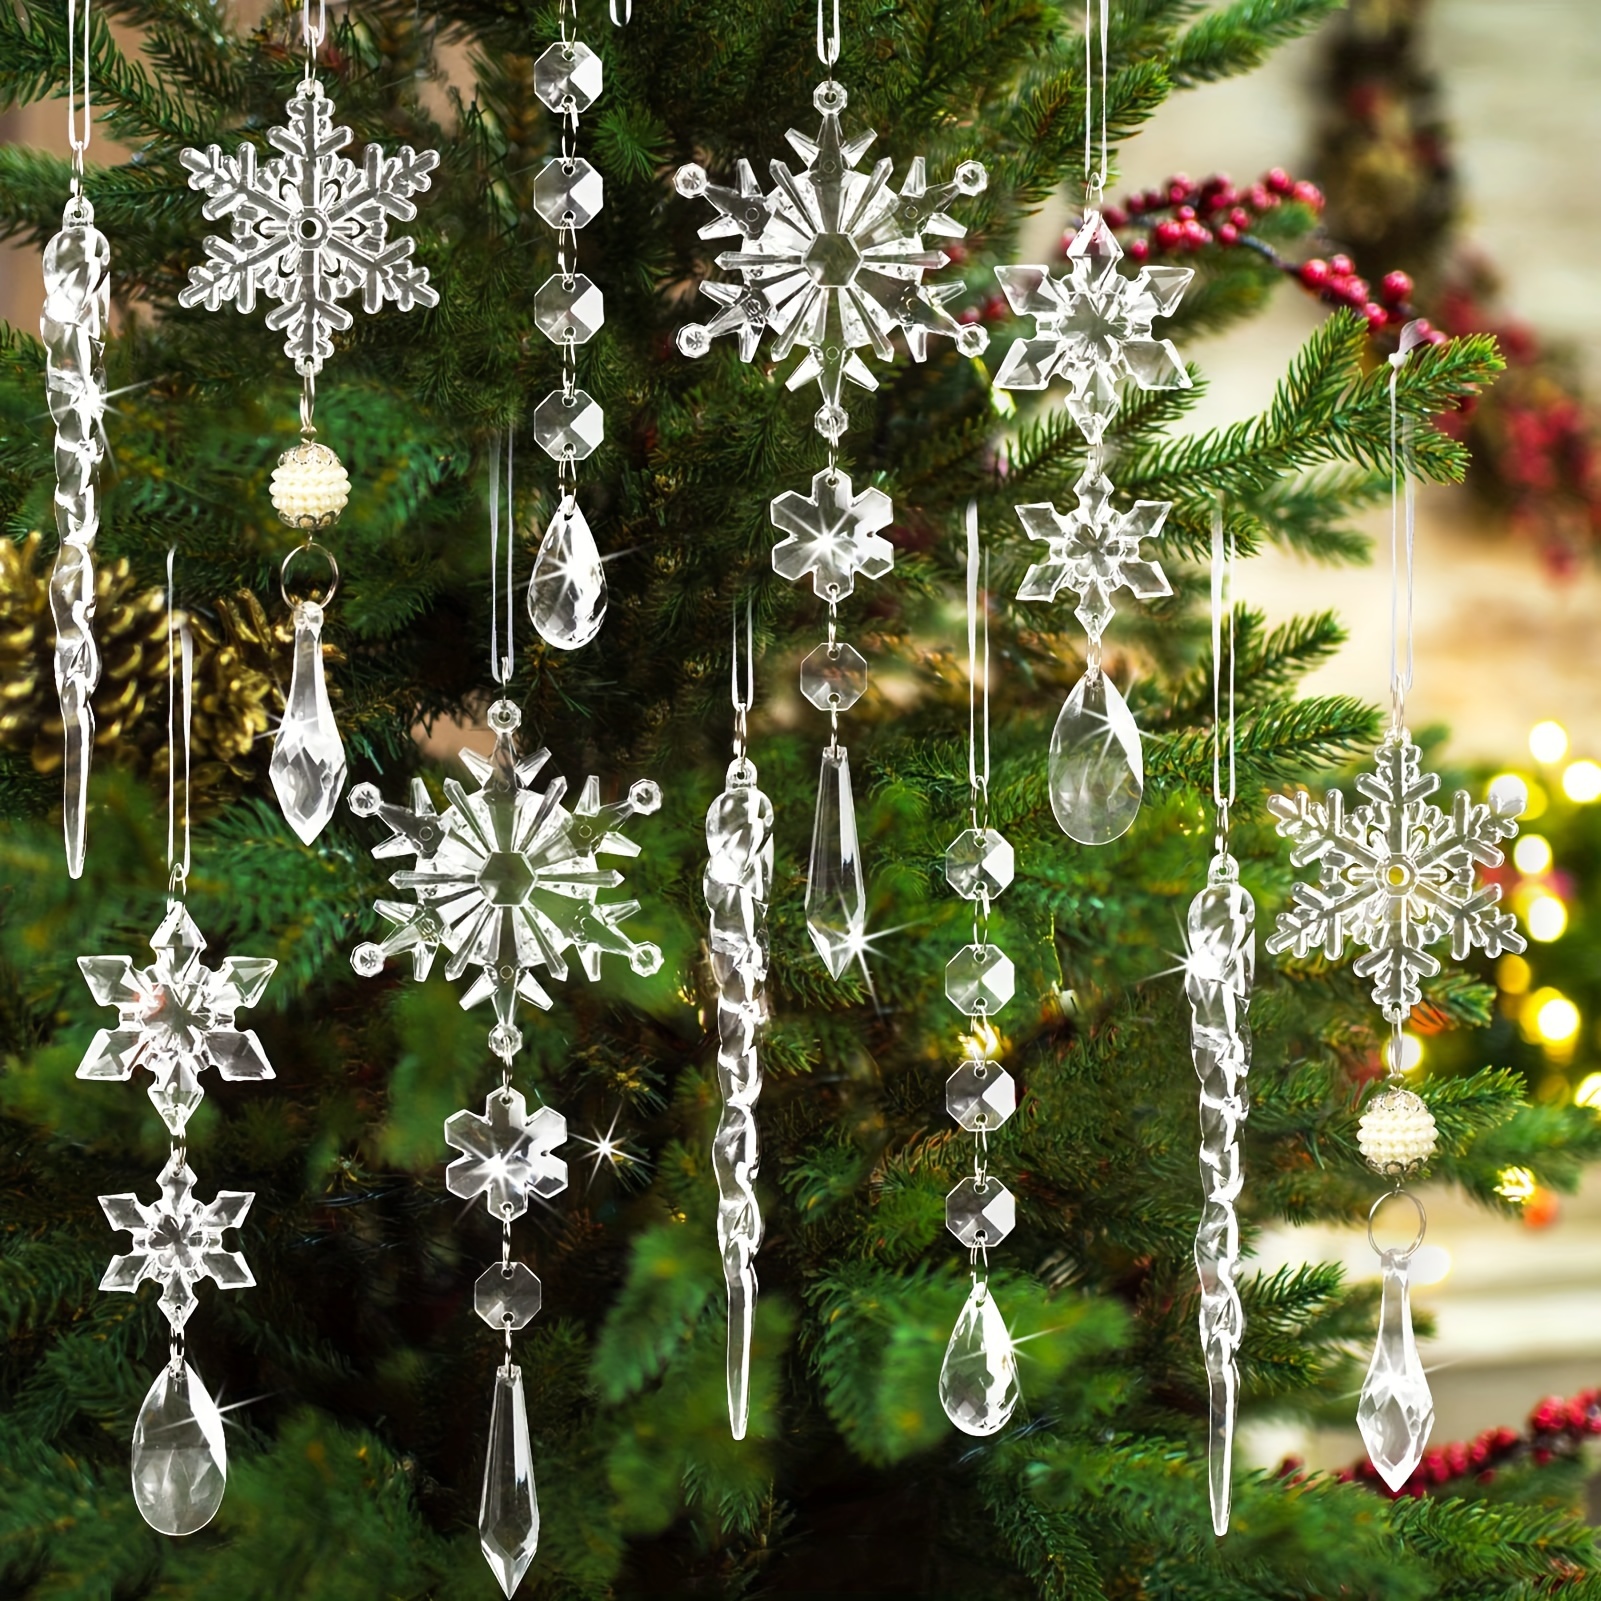 24PCS Snowflake Christmas Decorations, 3D Large Silver Paper Snowflakes  Garland Hanging Snow Flakes for Winter Wonderland Christmas Party  Decorations